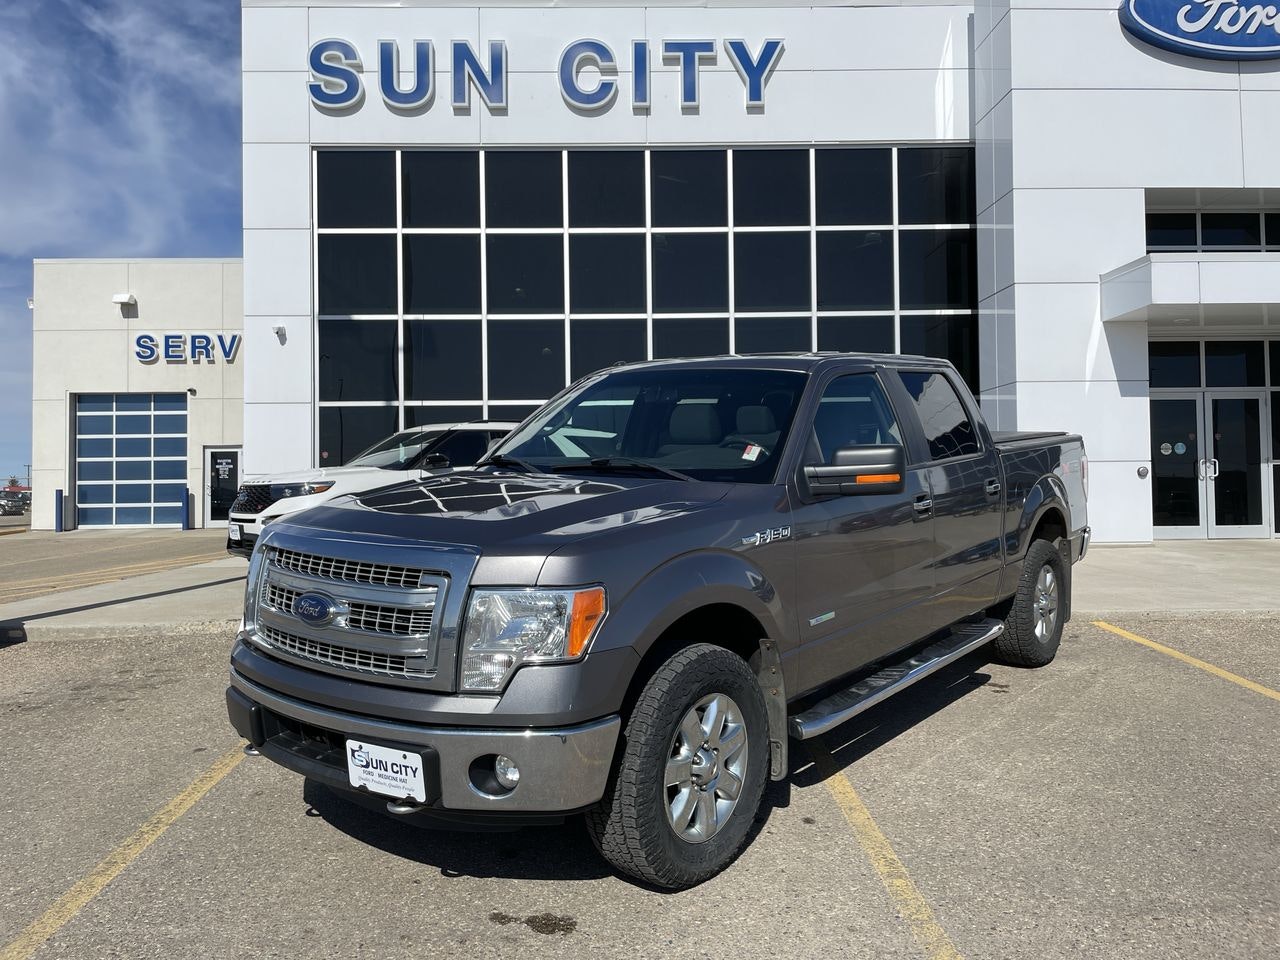 2014 Ford F-150 XLT XTR 302A MOON ROOF+MAX TOW PACKAGE (T123222A) Main Image